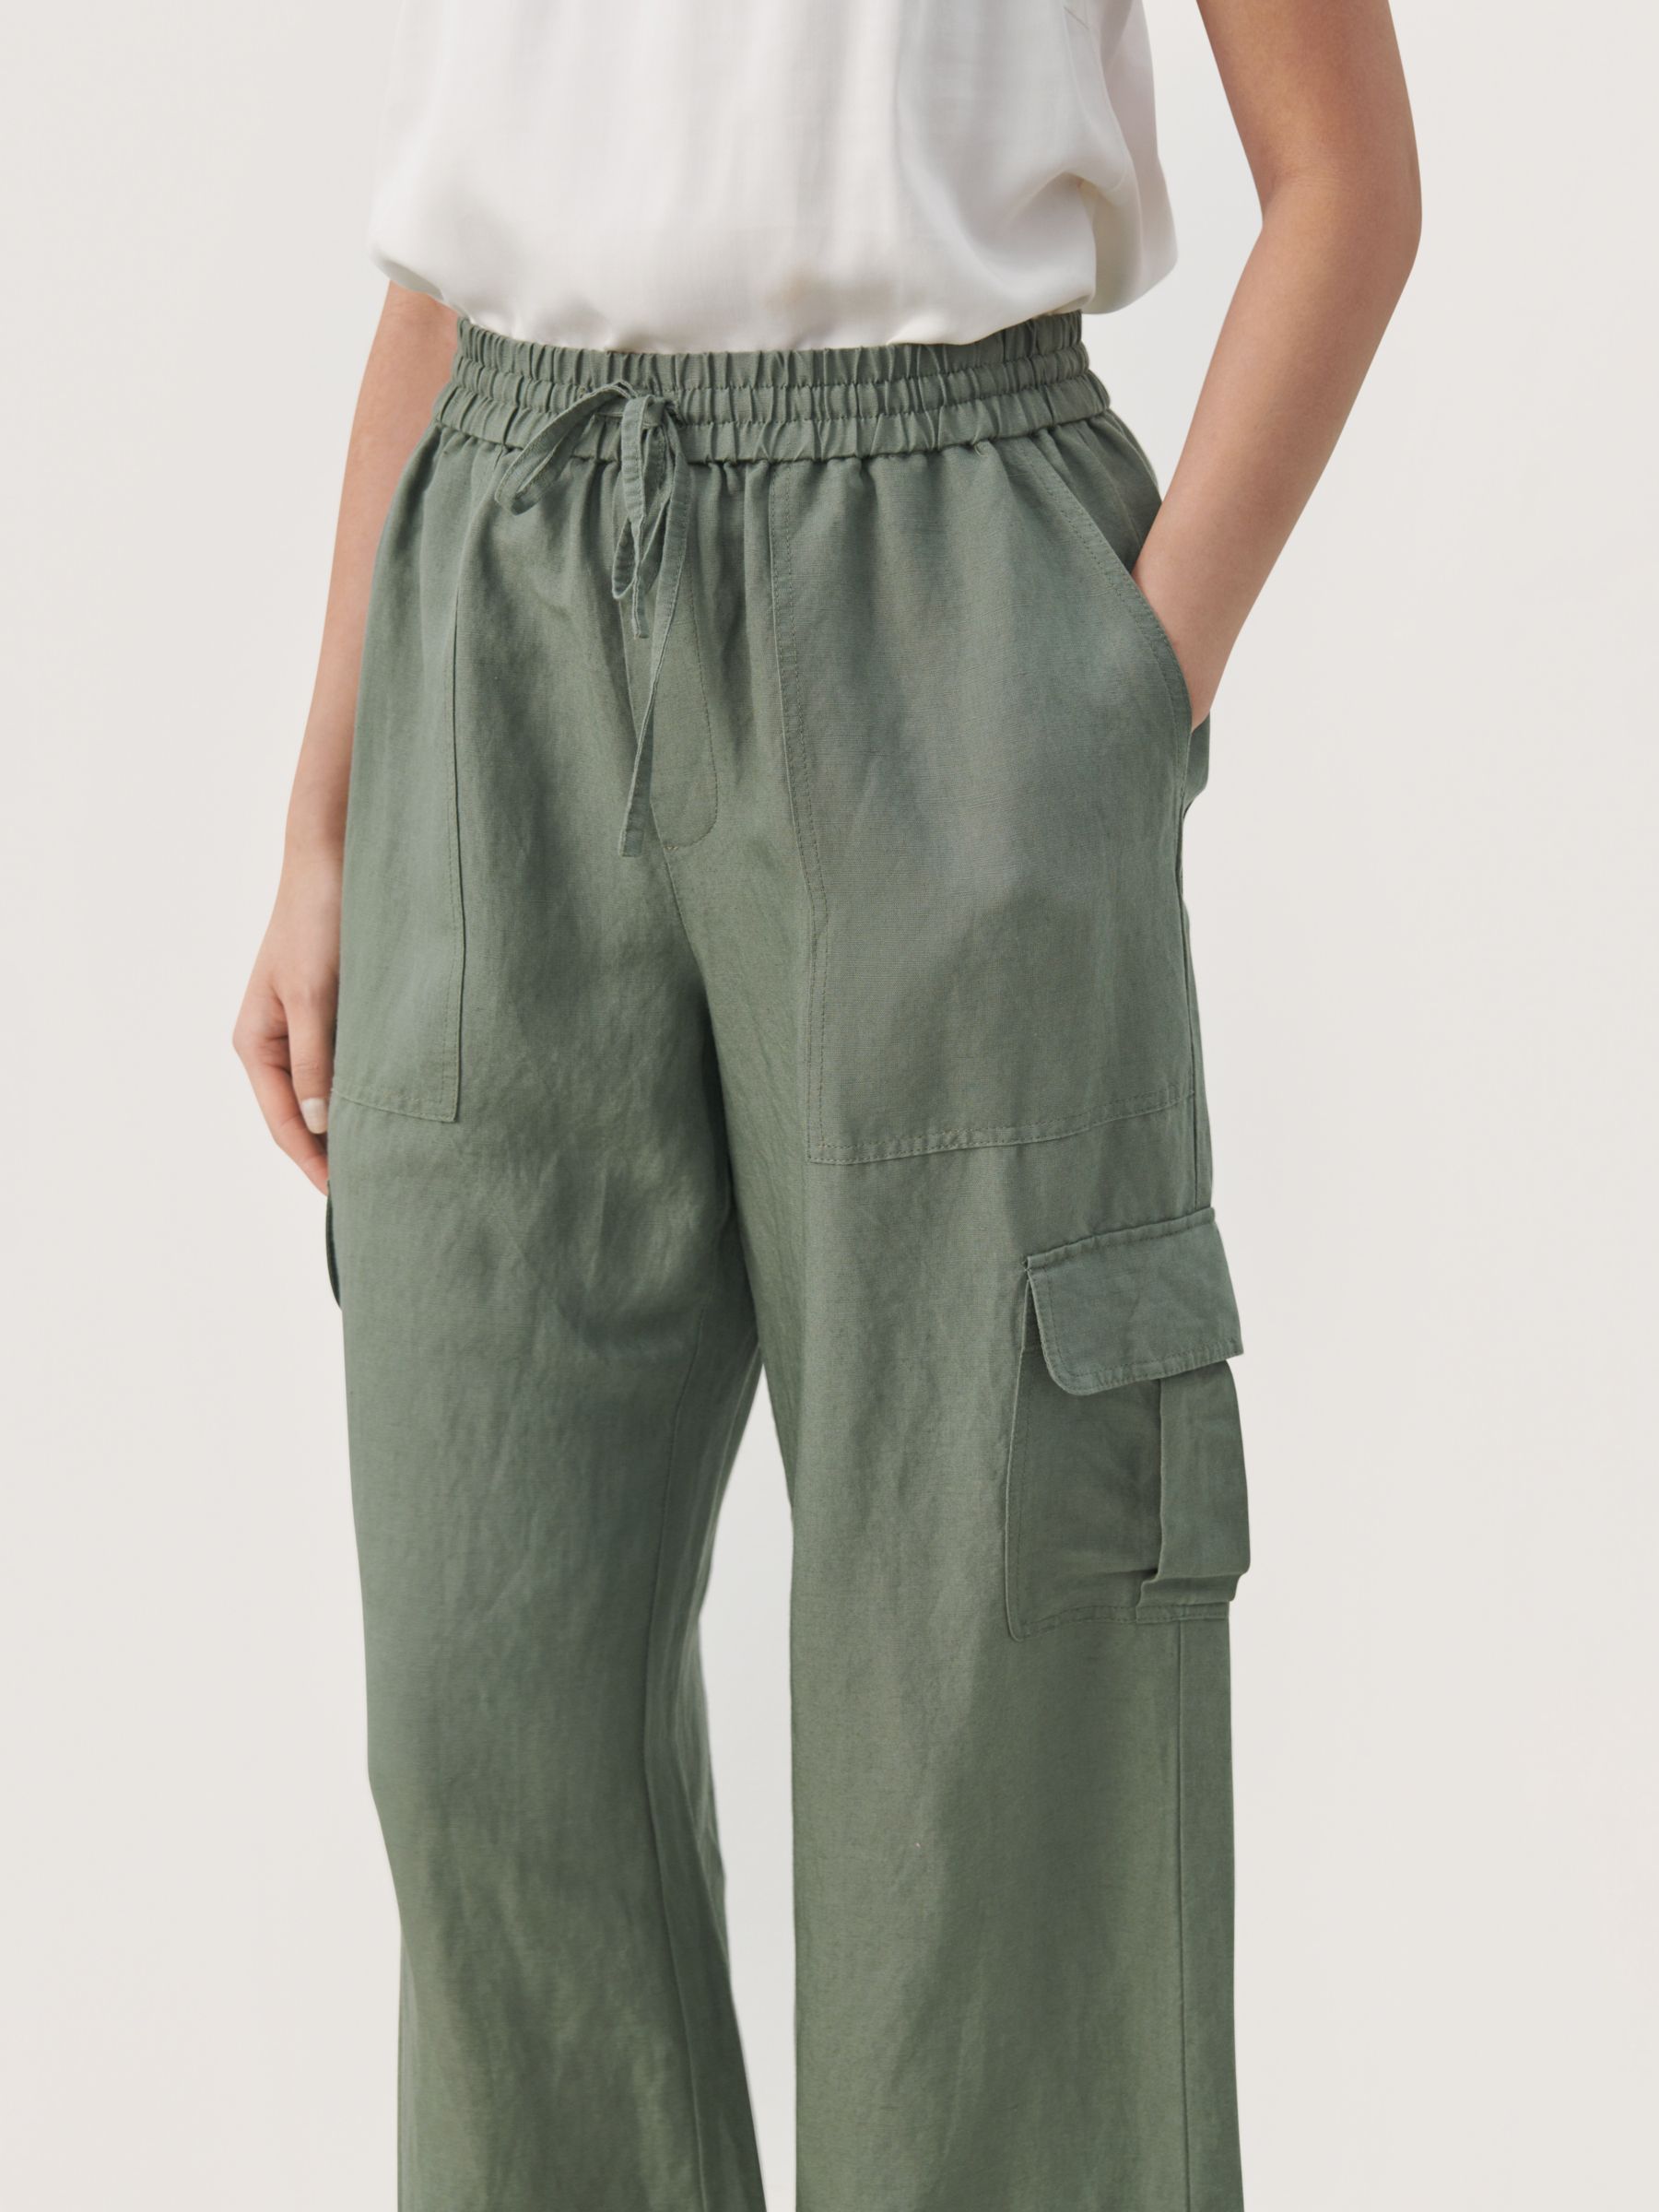 Buy Part Two Grazia High Waist Cargo Trousers, Agave Green Online at johnlewis.com